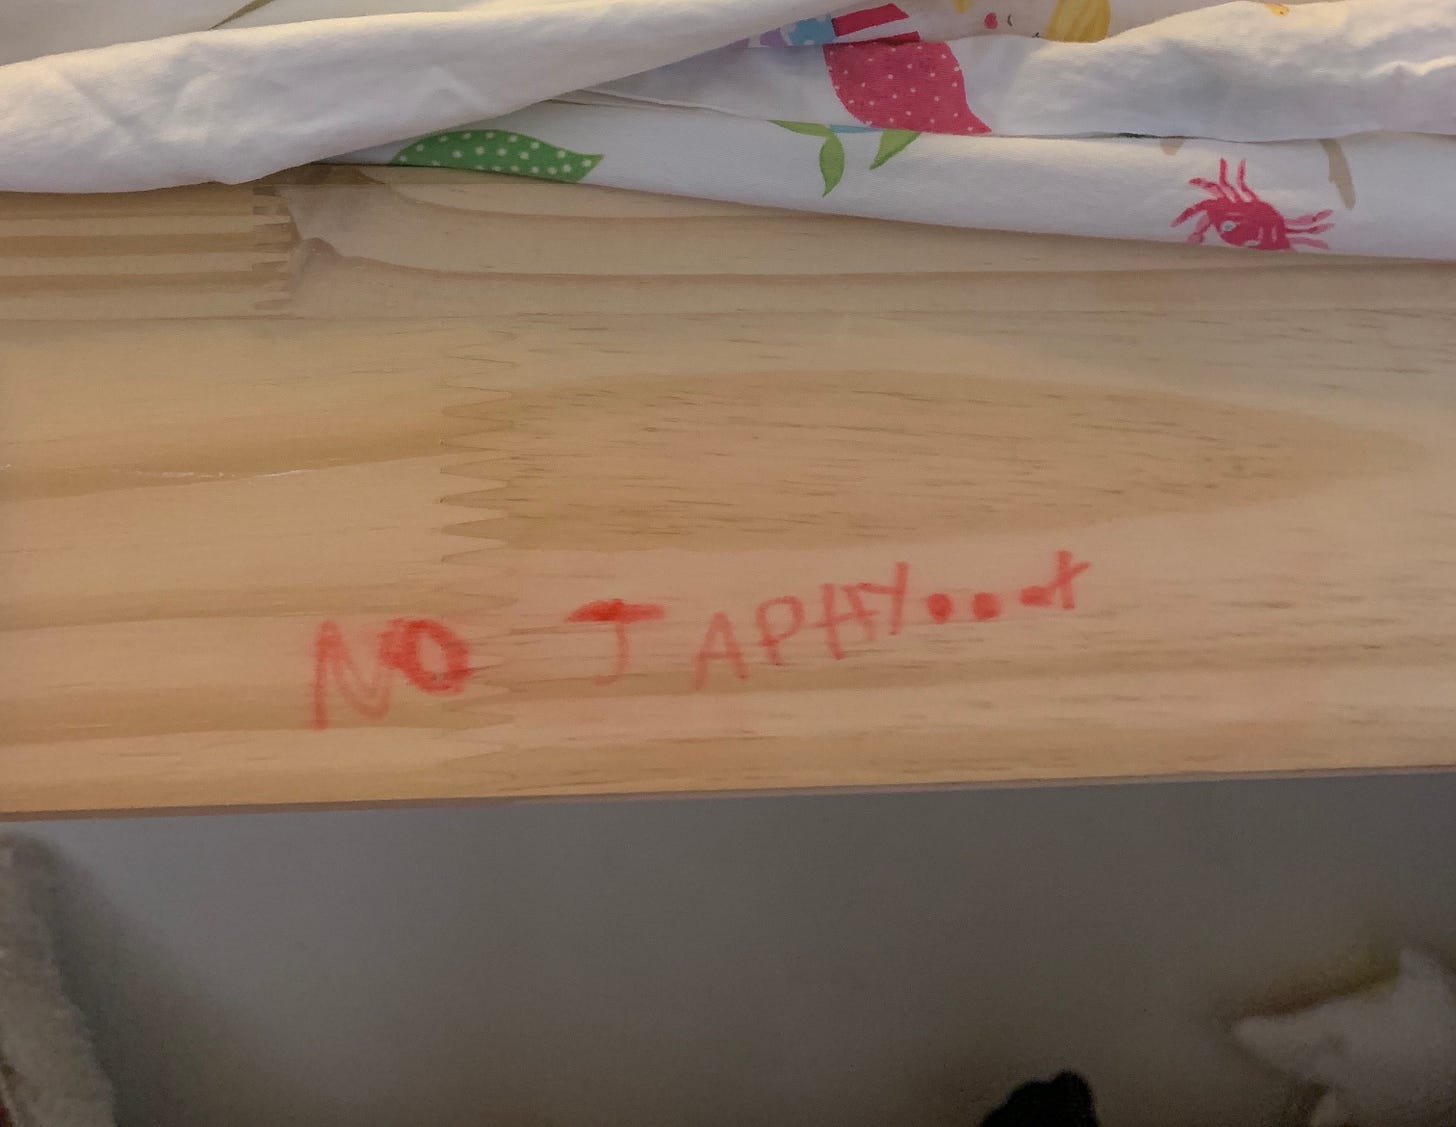 the words "No JAPHY" written in marker on a pine bunk bed